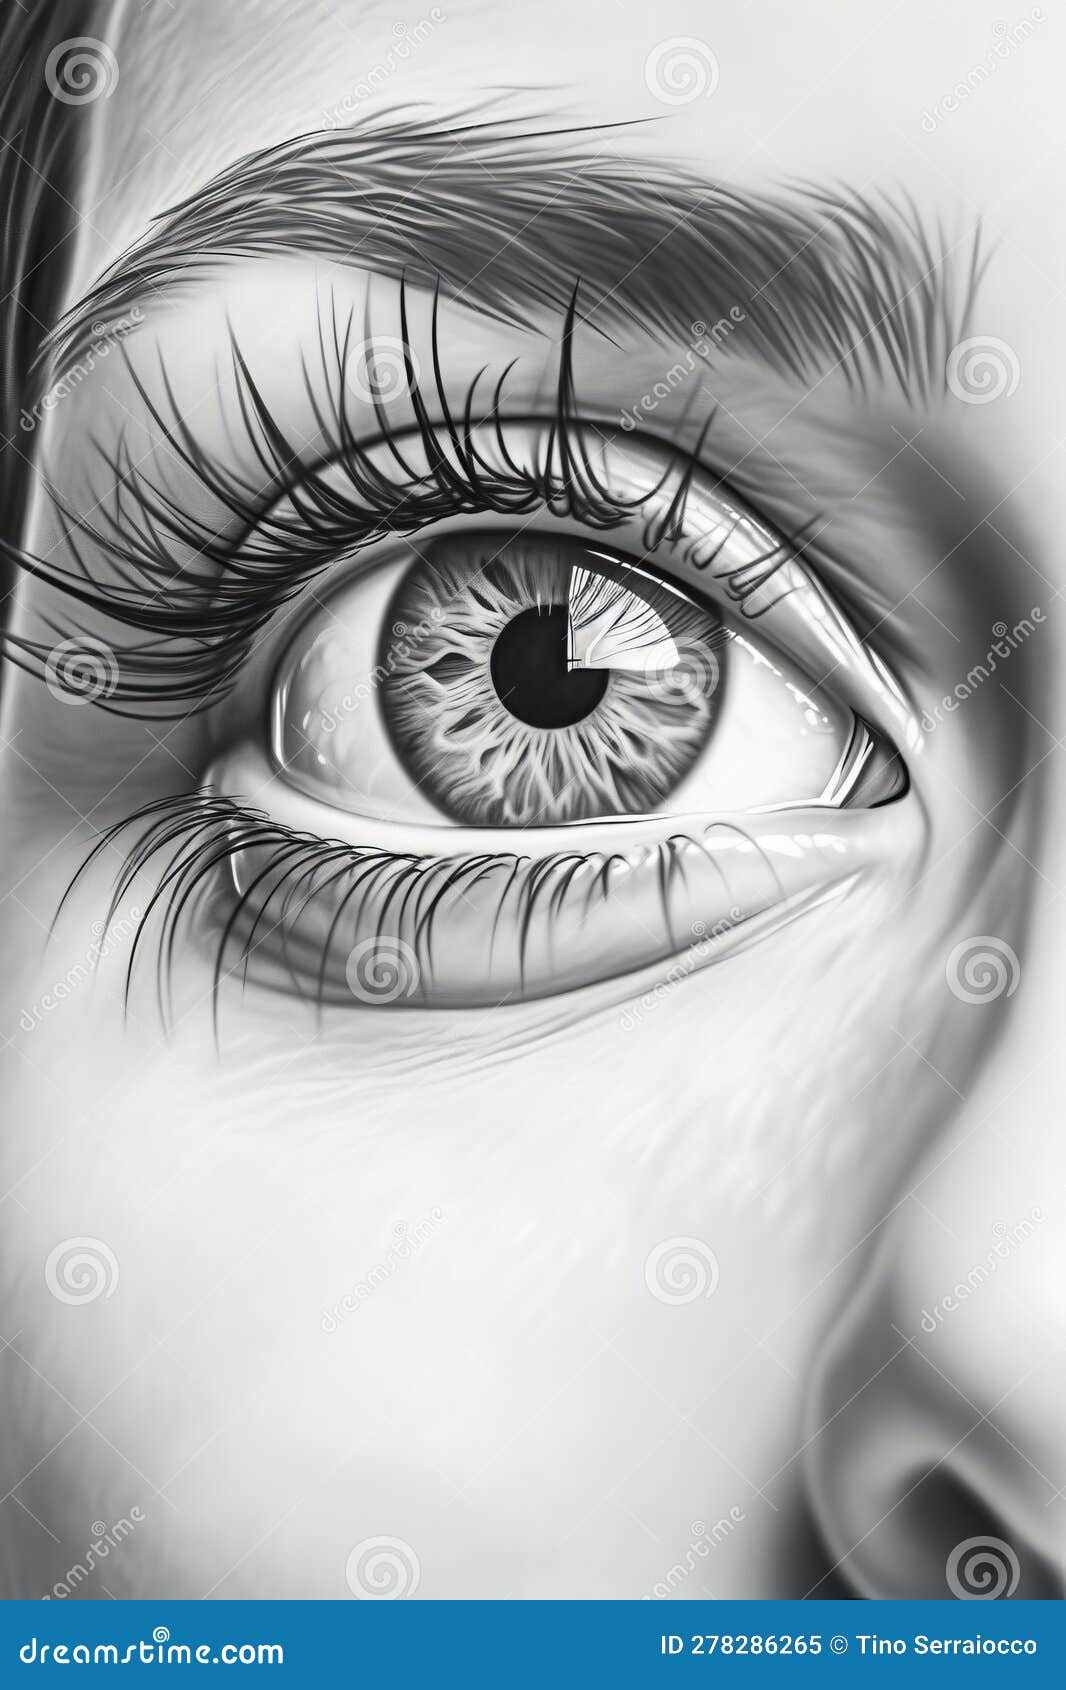 realistic eye pencil drawing by iona | Image